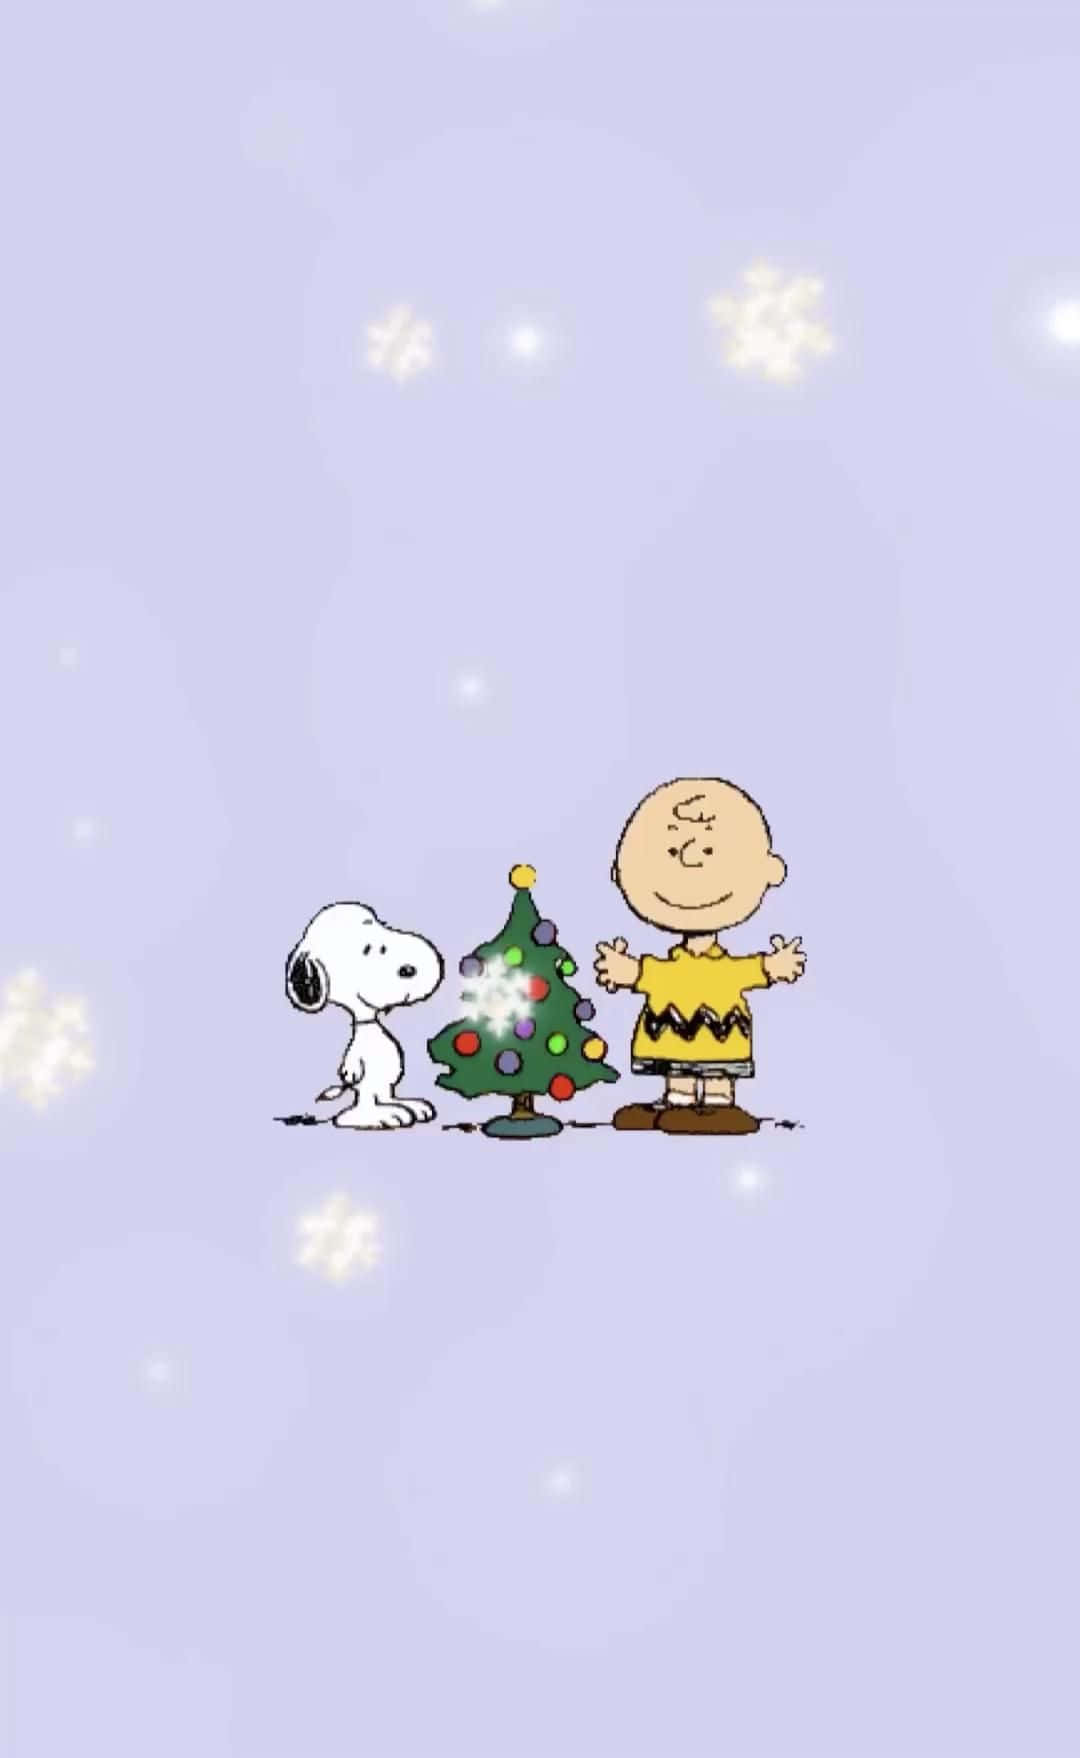 Cute Snoopy Christmas Tree With Charlie Brown Wallpaper